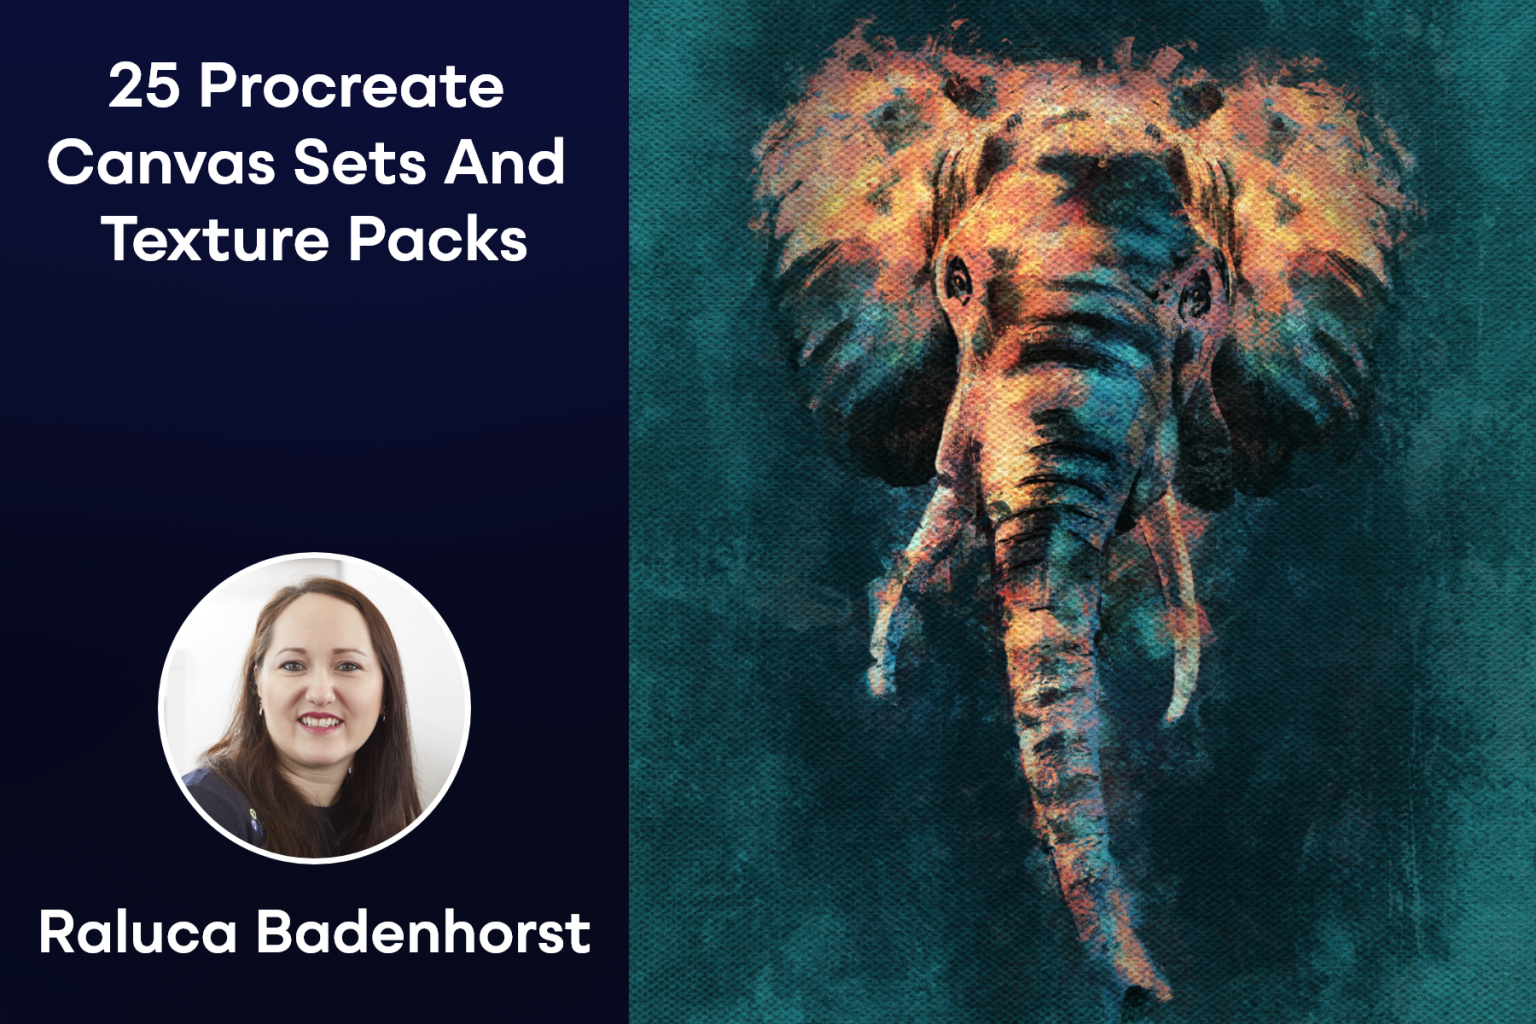 25 Procreate Canvas Sets and Texture Packs